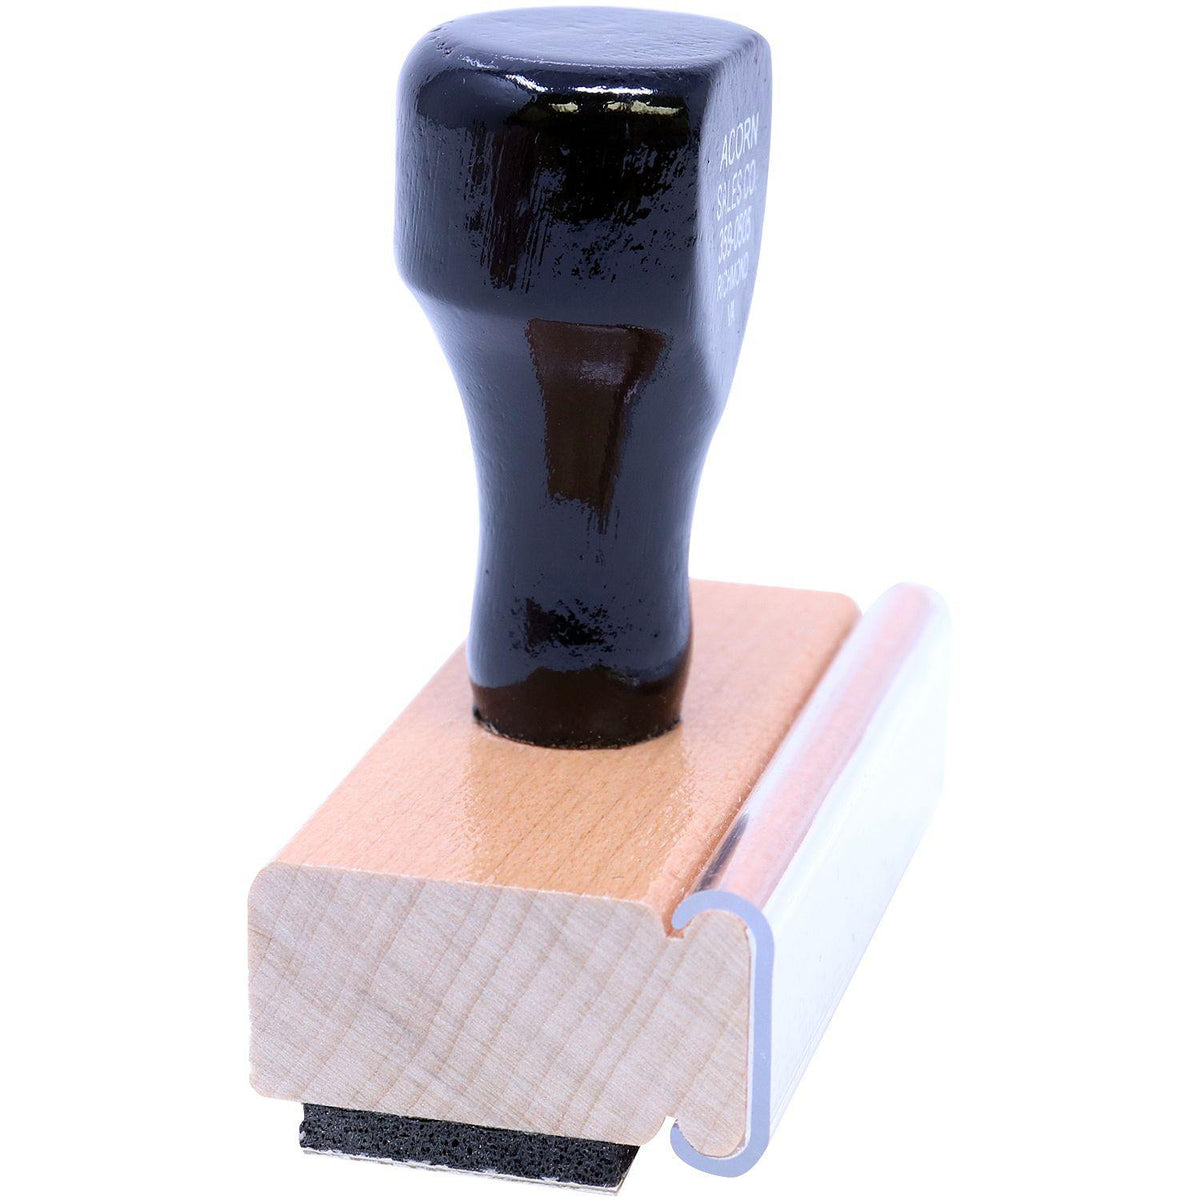 Narrow Font First Class Mail Rubber Stamp - Engineer Seal Stamps - Brand_Acorn, Impression Size_Small, Stamp Type_Regular Stamp, Type of Use_Business, Type of Use_Postal &amp; Mailing, Type of Use_Professional